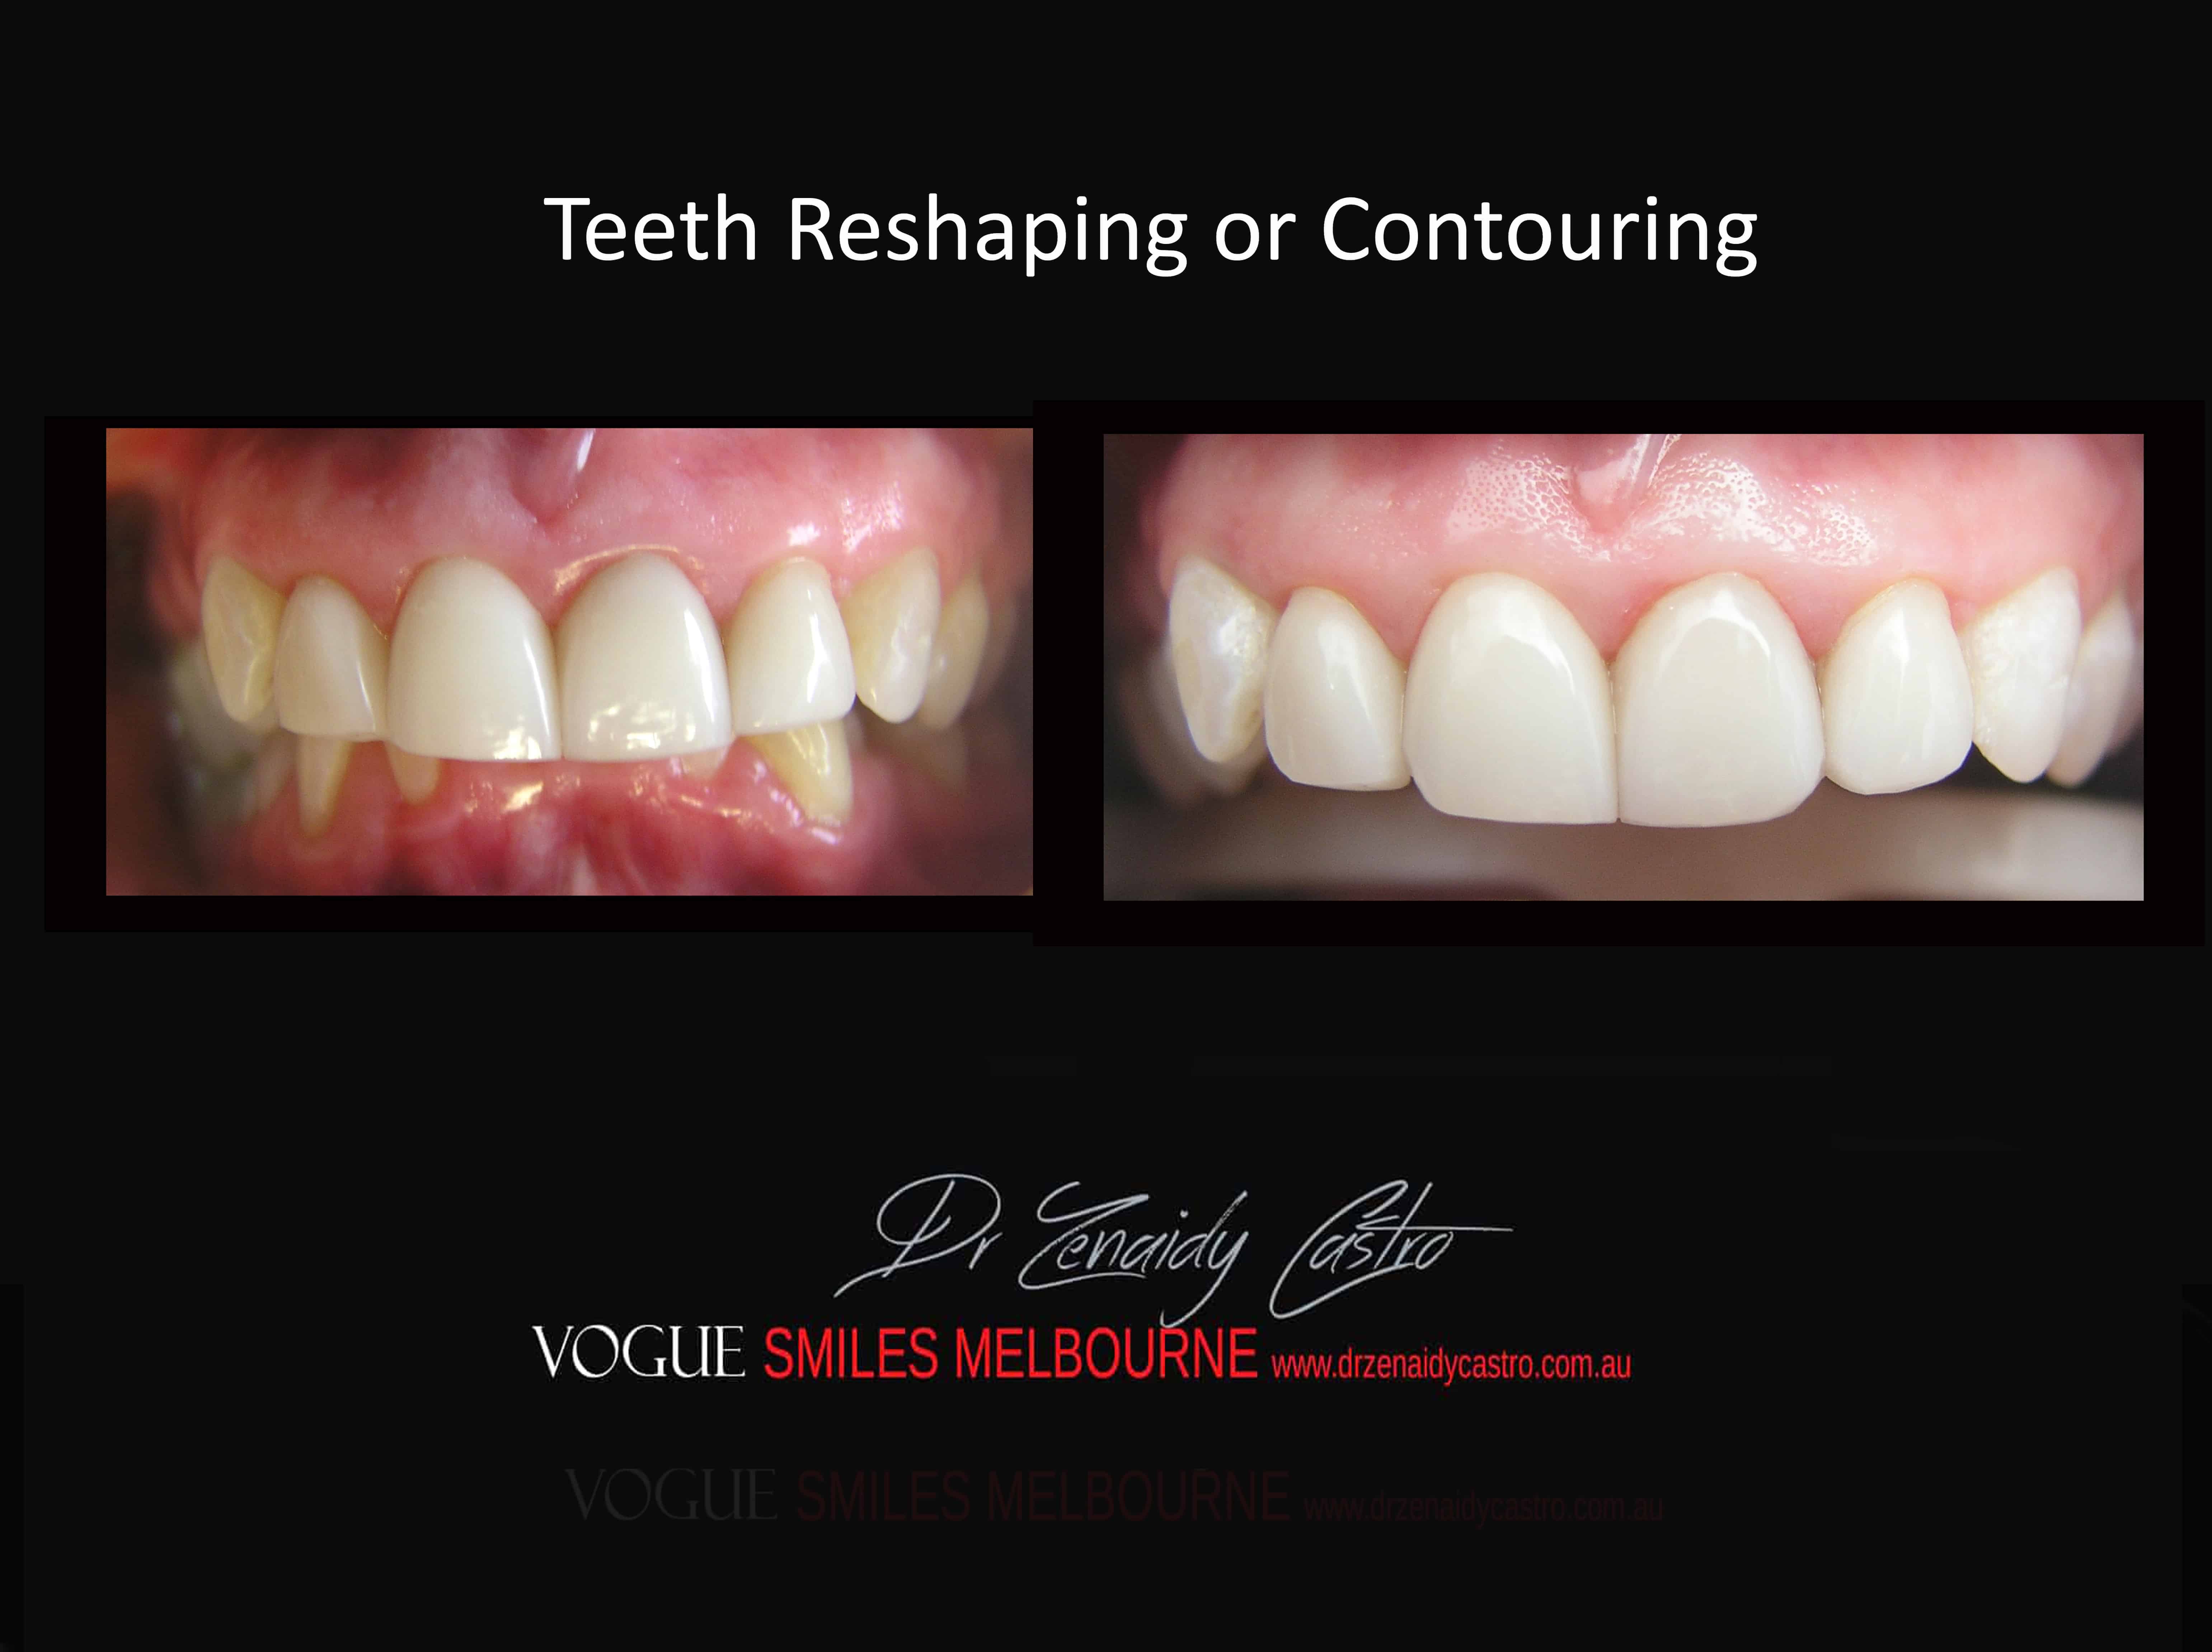 Teeth Reshaping and Contouring Melbourne